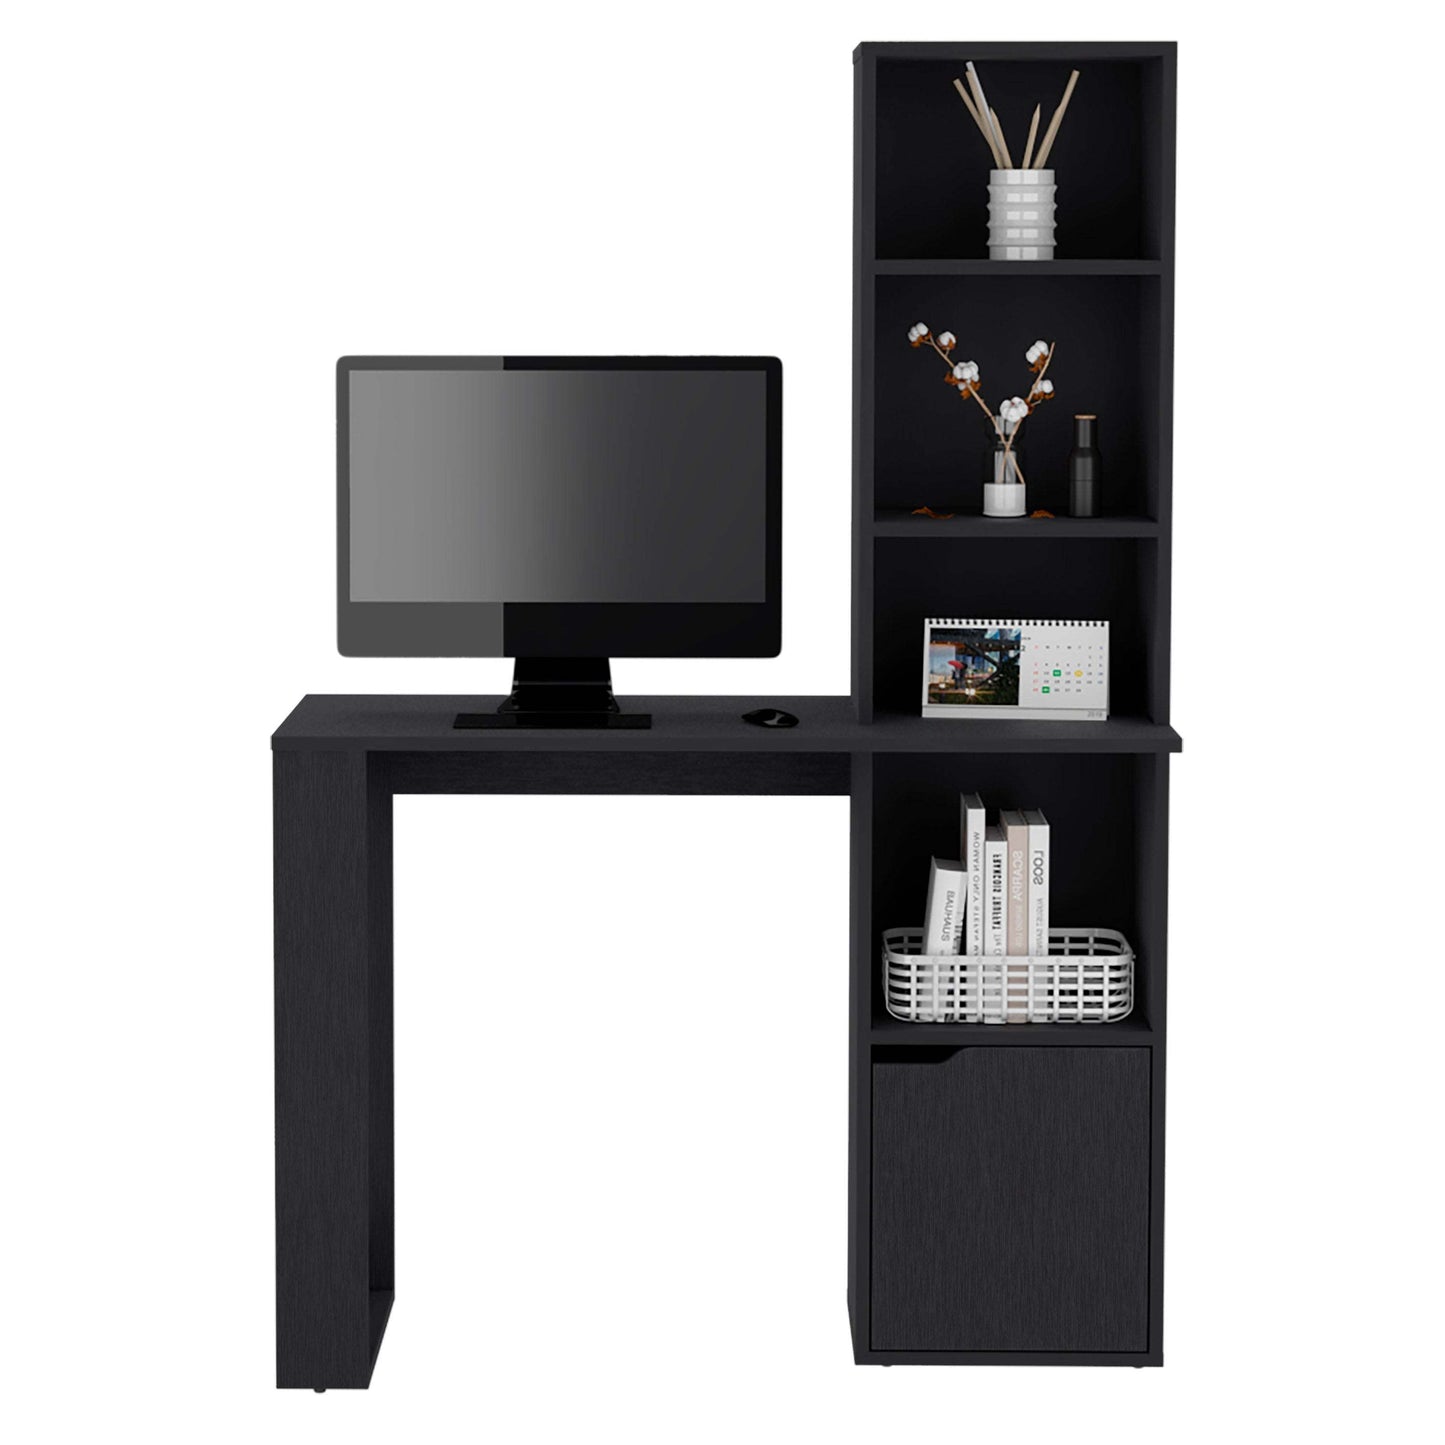 Ripley Writing Desk Combo with Bookcase and Cabinet - Black Wood Furniture with Simple Assembly